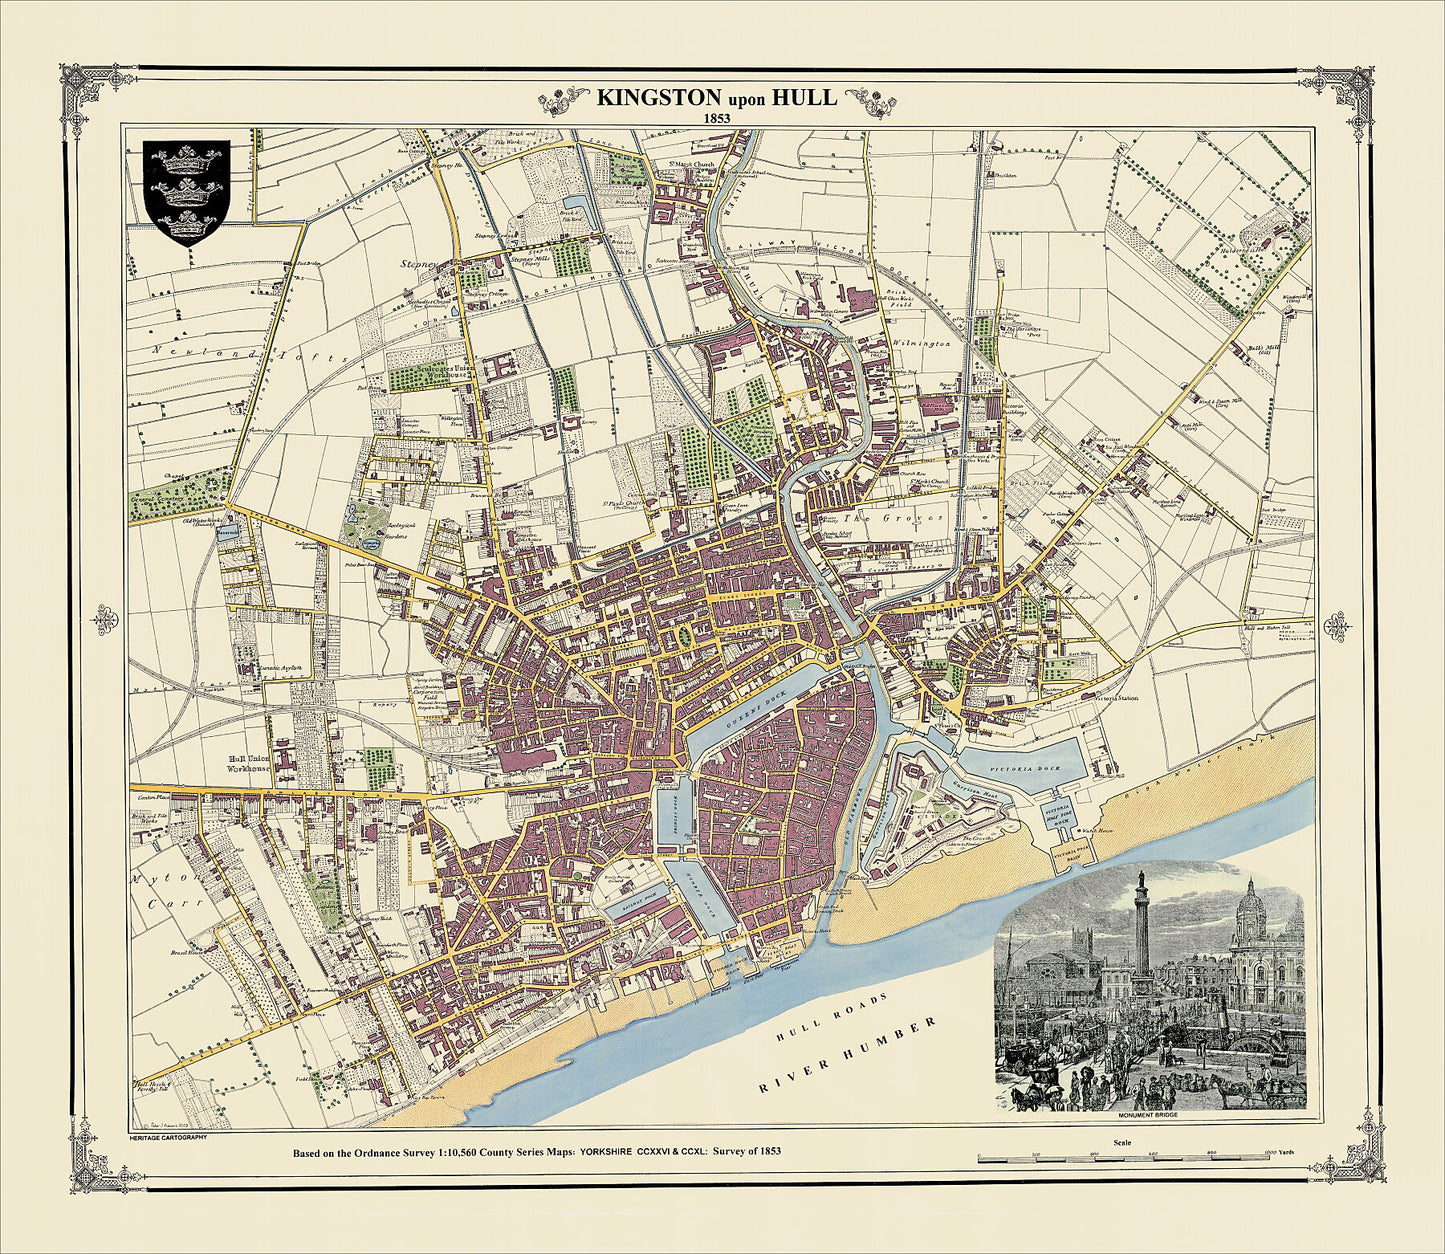 Coloured Victorian map of Kingston upon Hull in 1853 by Peter J Adams of Heritage Cartography